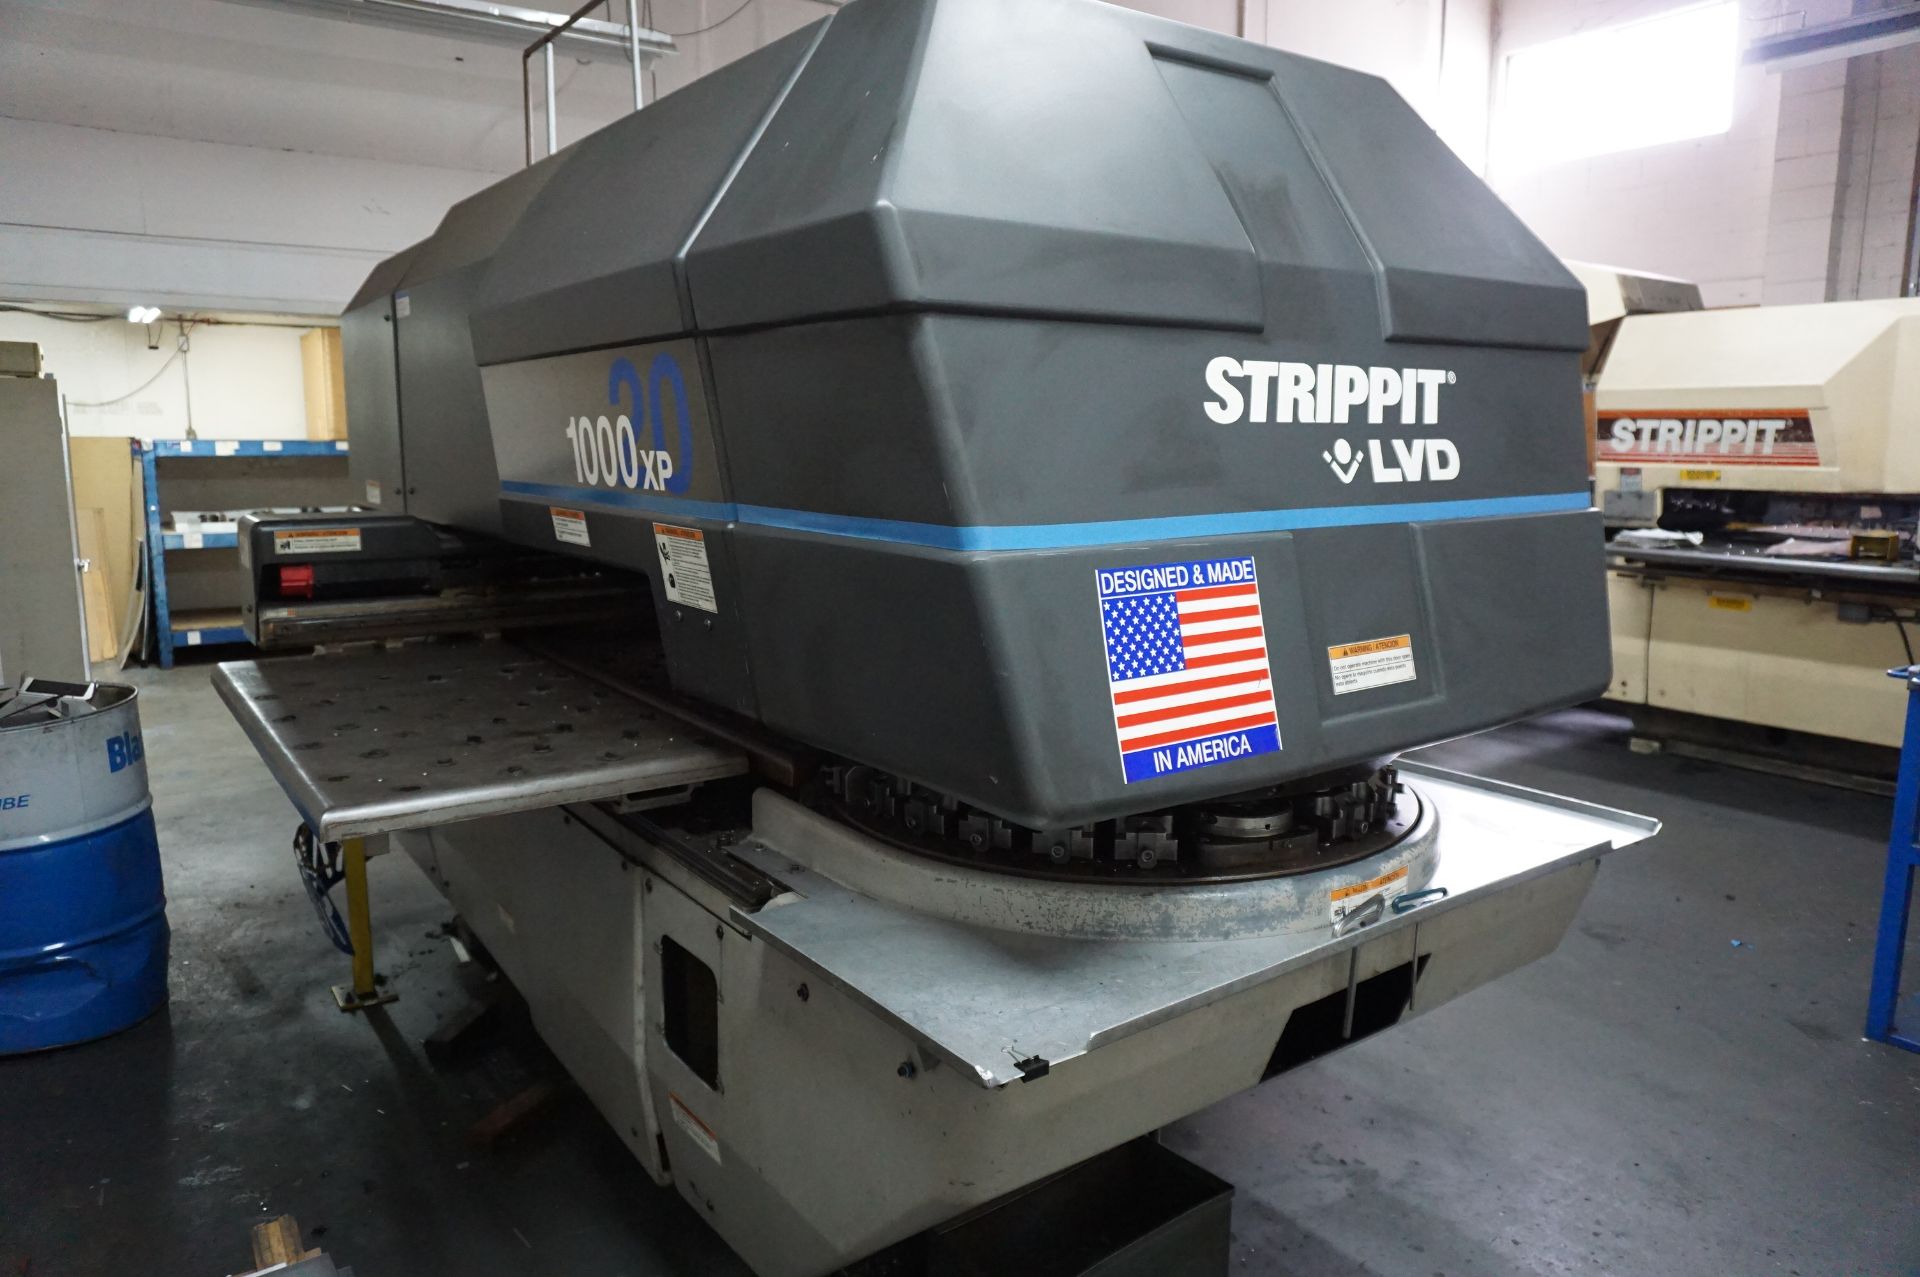 STRIPPIT LVD 1000XP/20 TURRET PUNCH, CATALOG 0124771034, S/N 209091800, 20.5 TON PUNCH CAPACITY, - Image 2 of 18